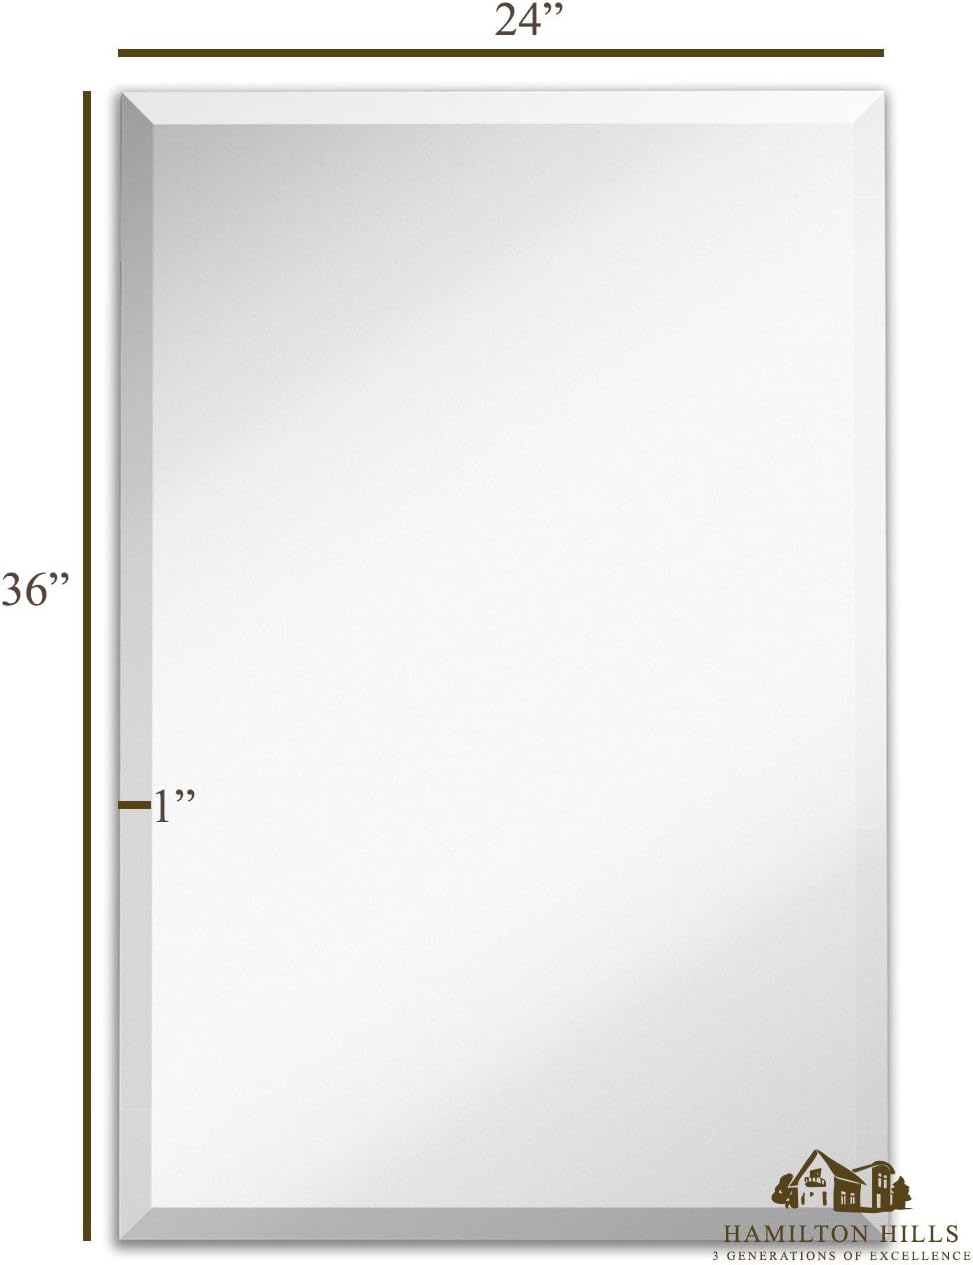 24x36-Inch Frameless Rectangular Mirror - Beveled Bathroom Mirrors for Wall - Large Polished Glass Core Back Vanity Mirror - Hanging Horizontally or Vertically